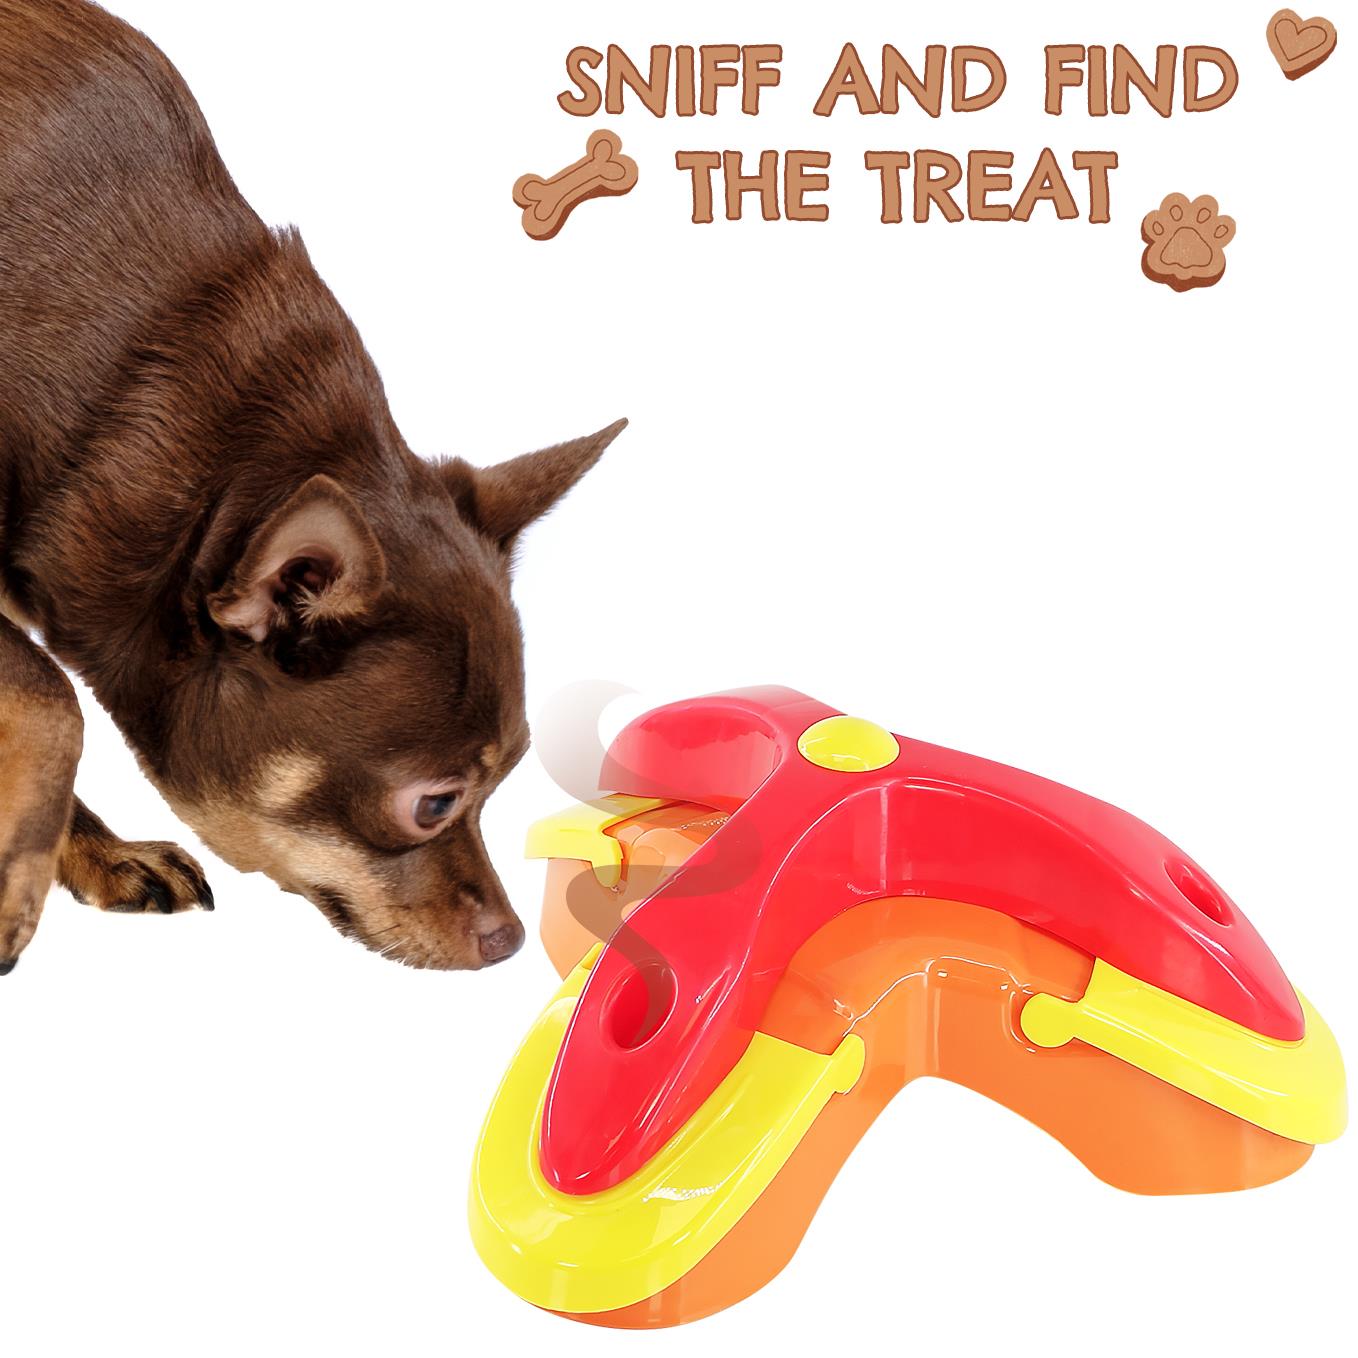 The Magic Toy Shop Dog Toy Dog Toy for Energetic Pups